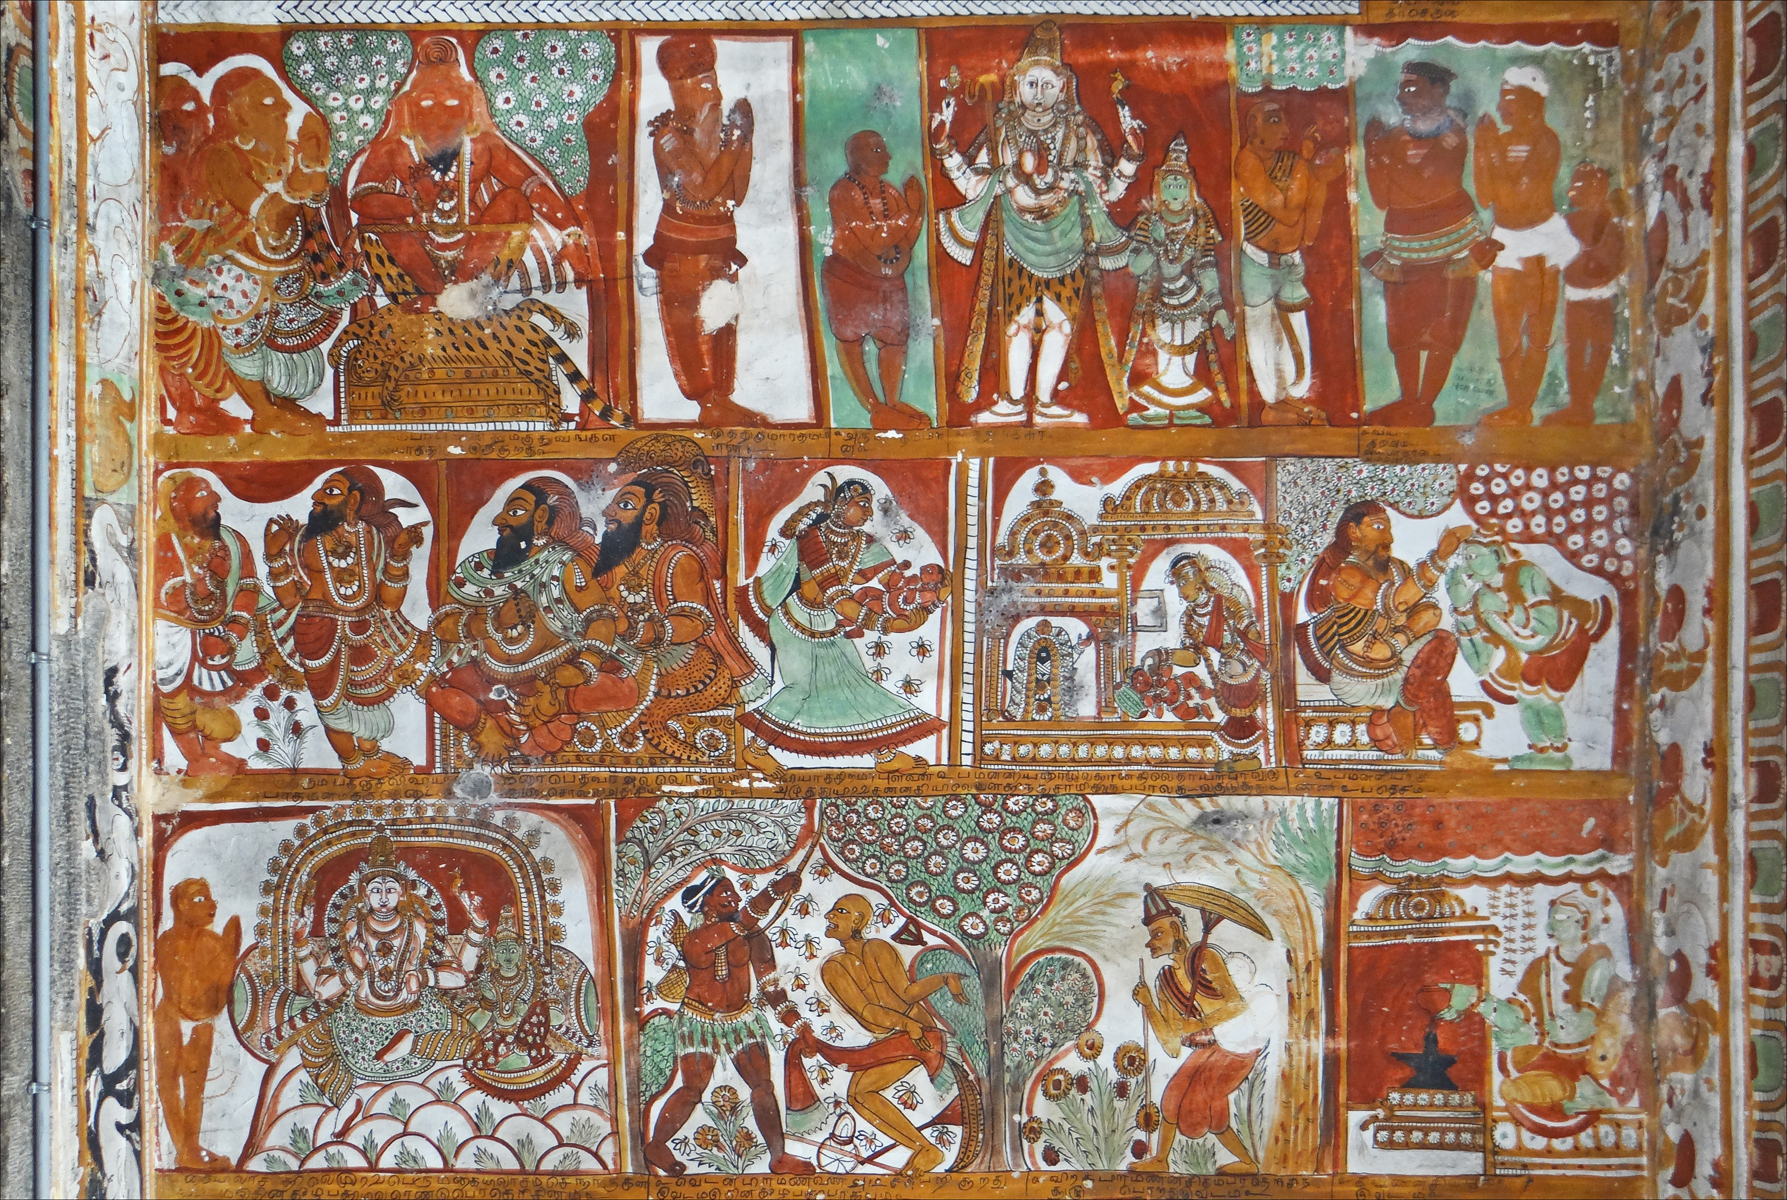 an old painting shows the art in different styles